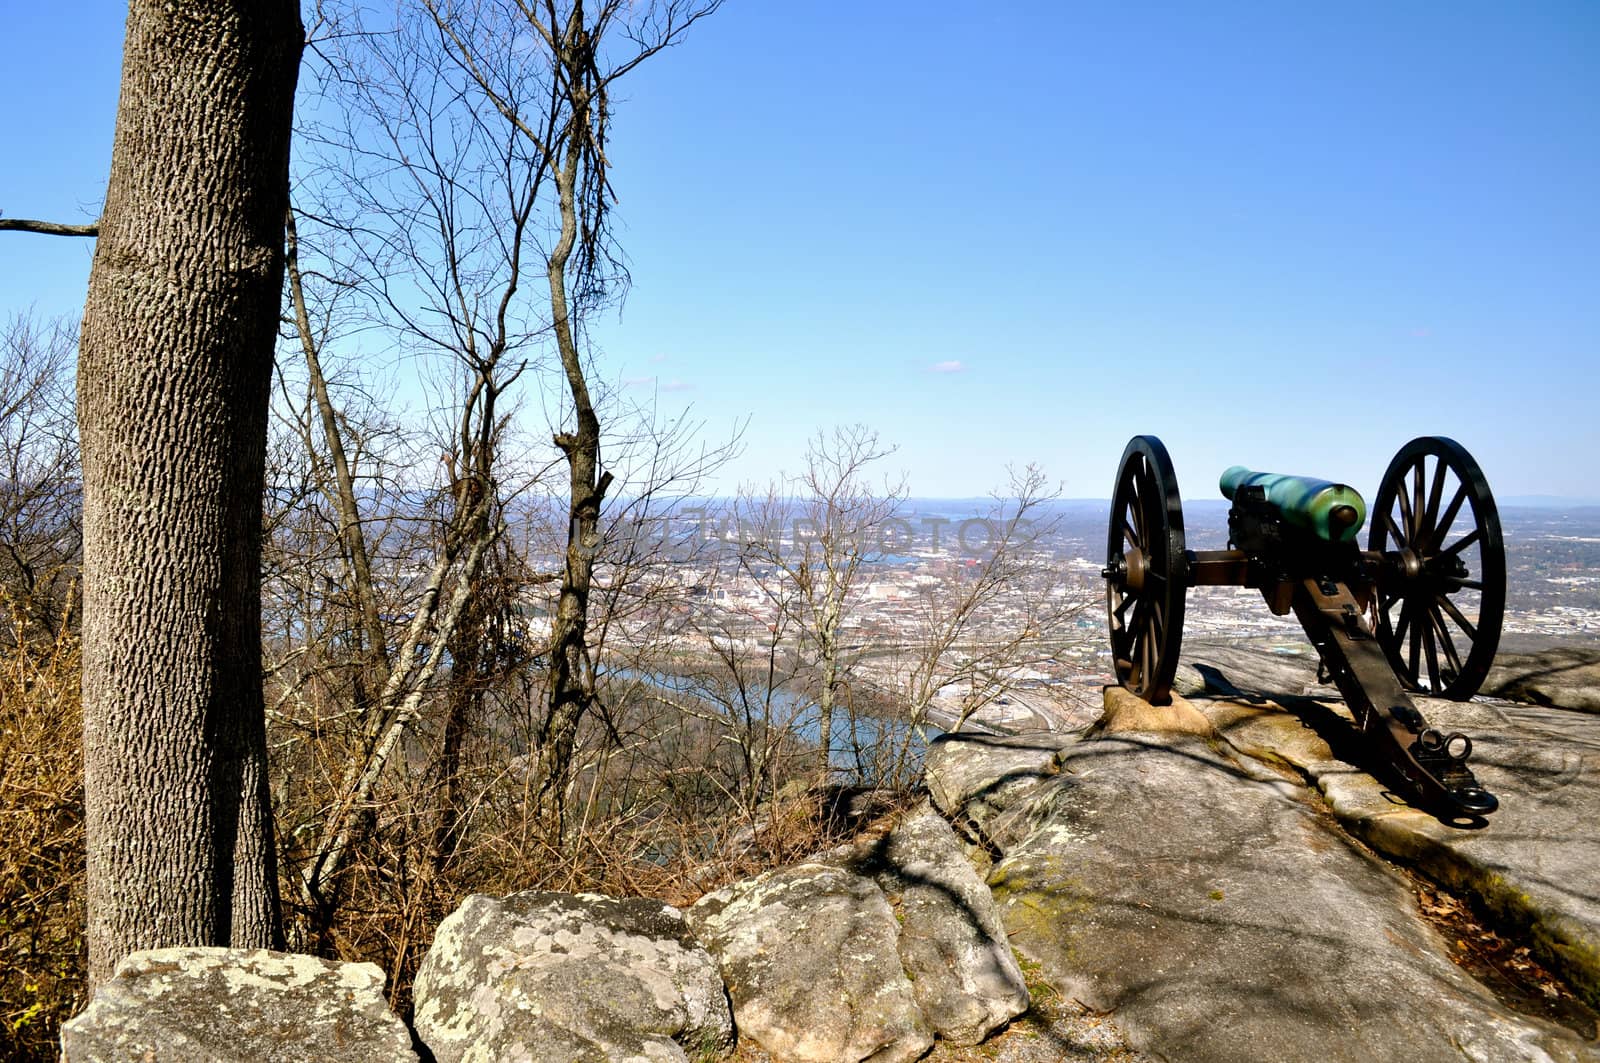 Cannon over Chattanooga by RefocusPhoto